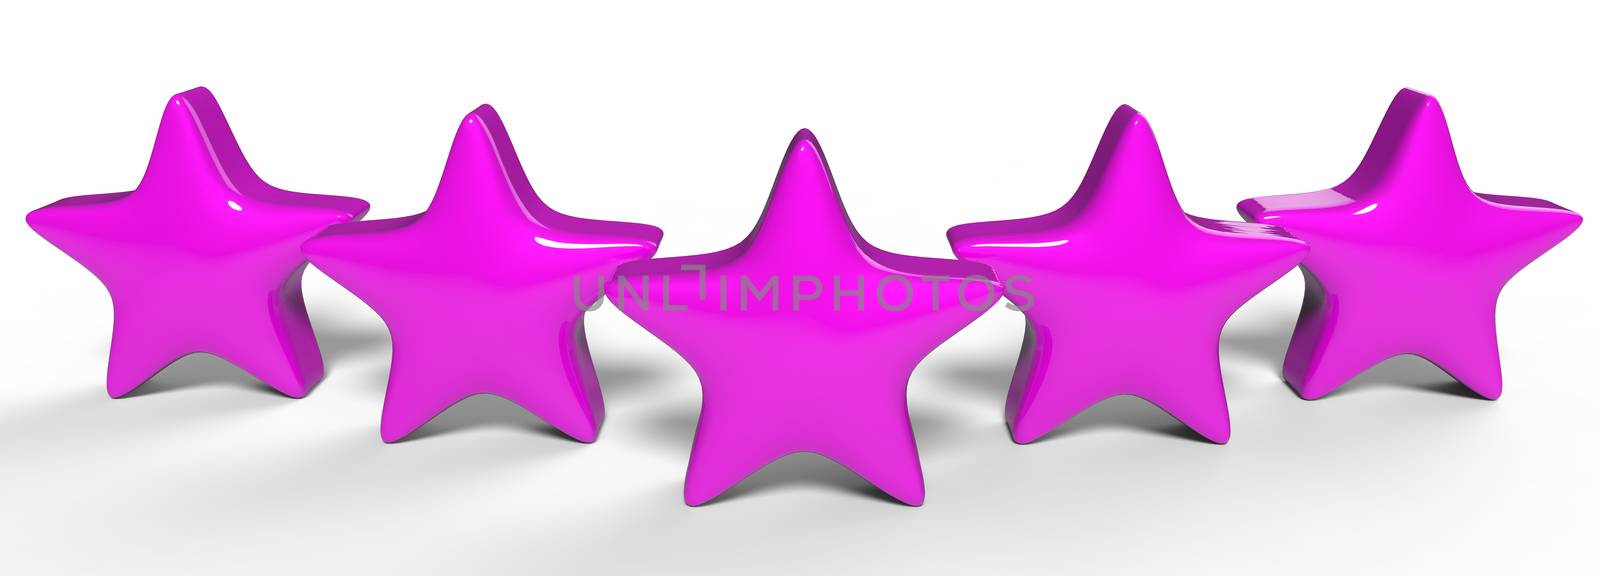 3d five purple star on color background. Render and illustration of golden star for premium review by Andreajk3